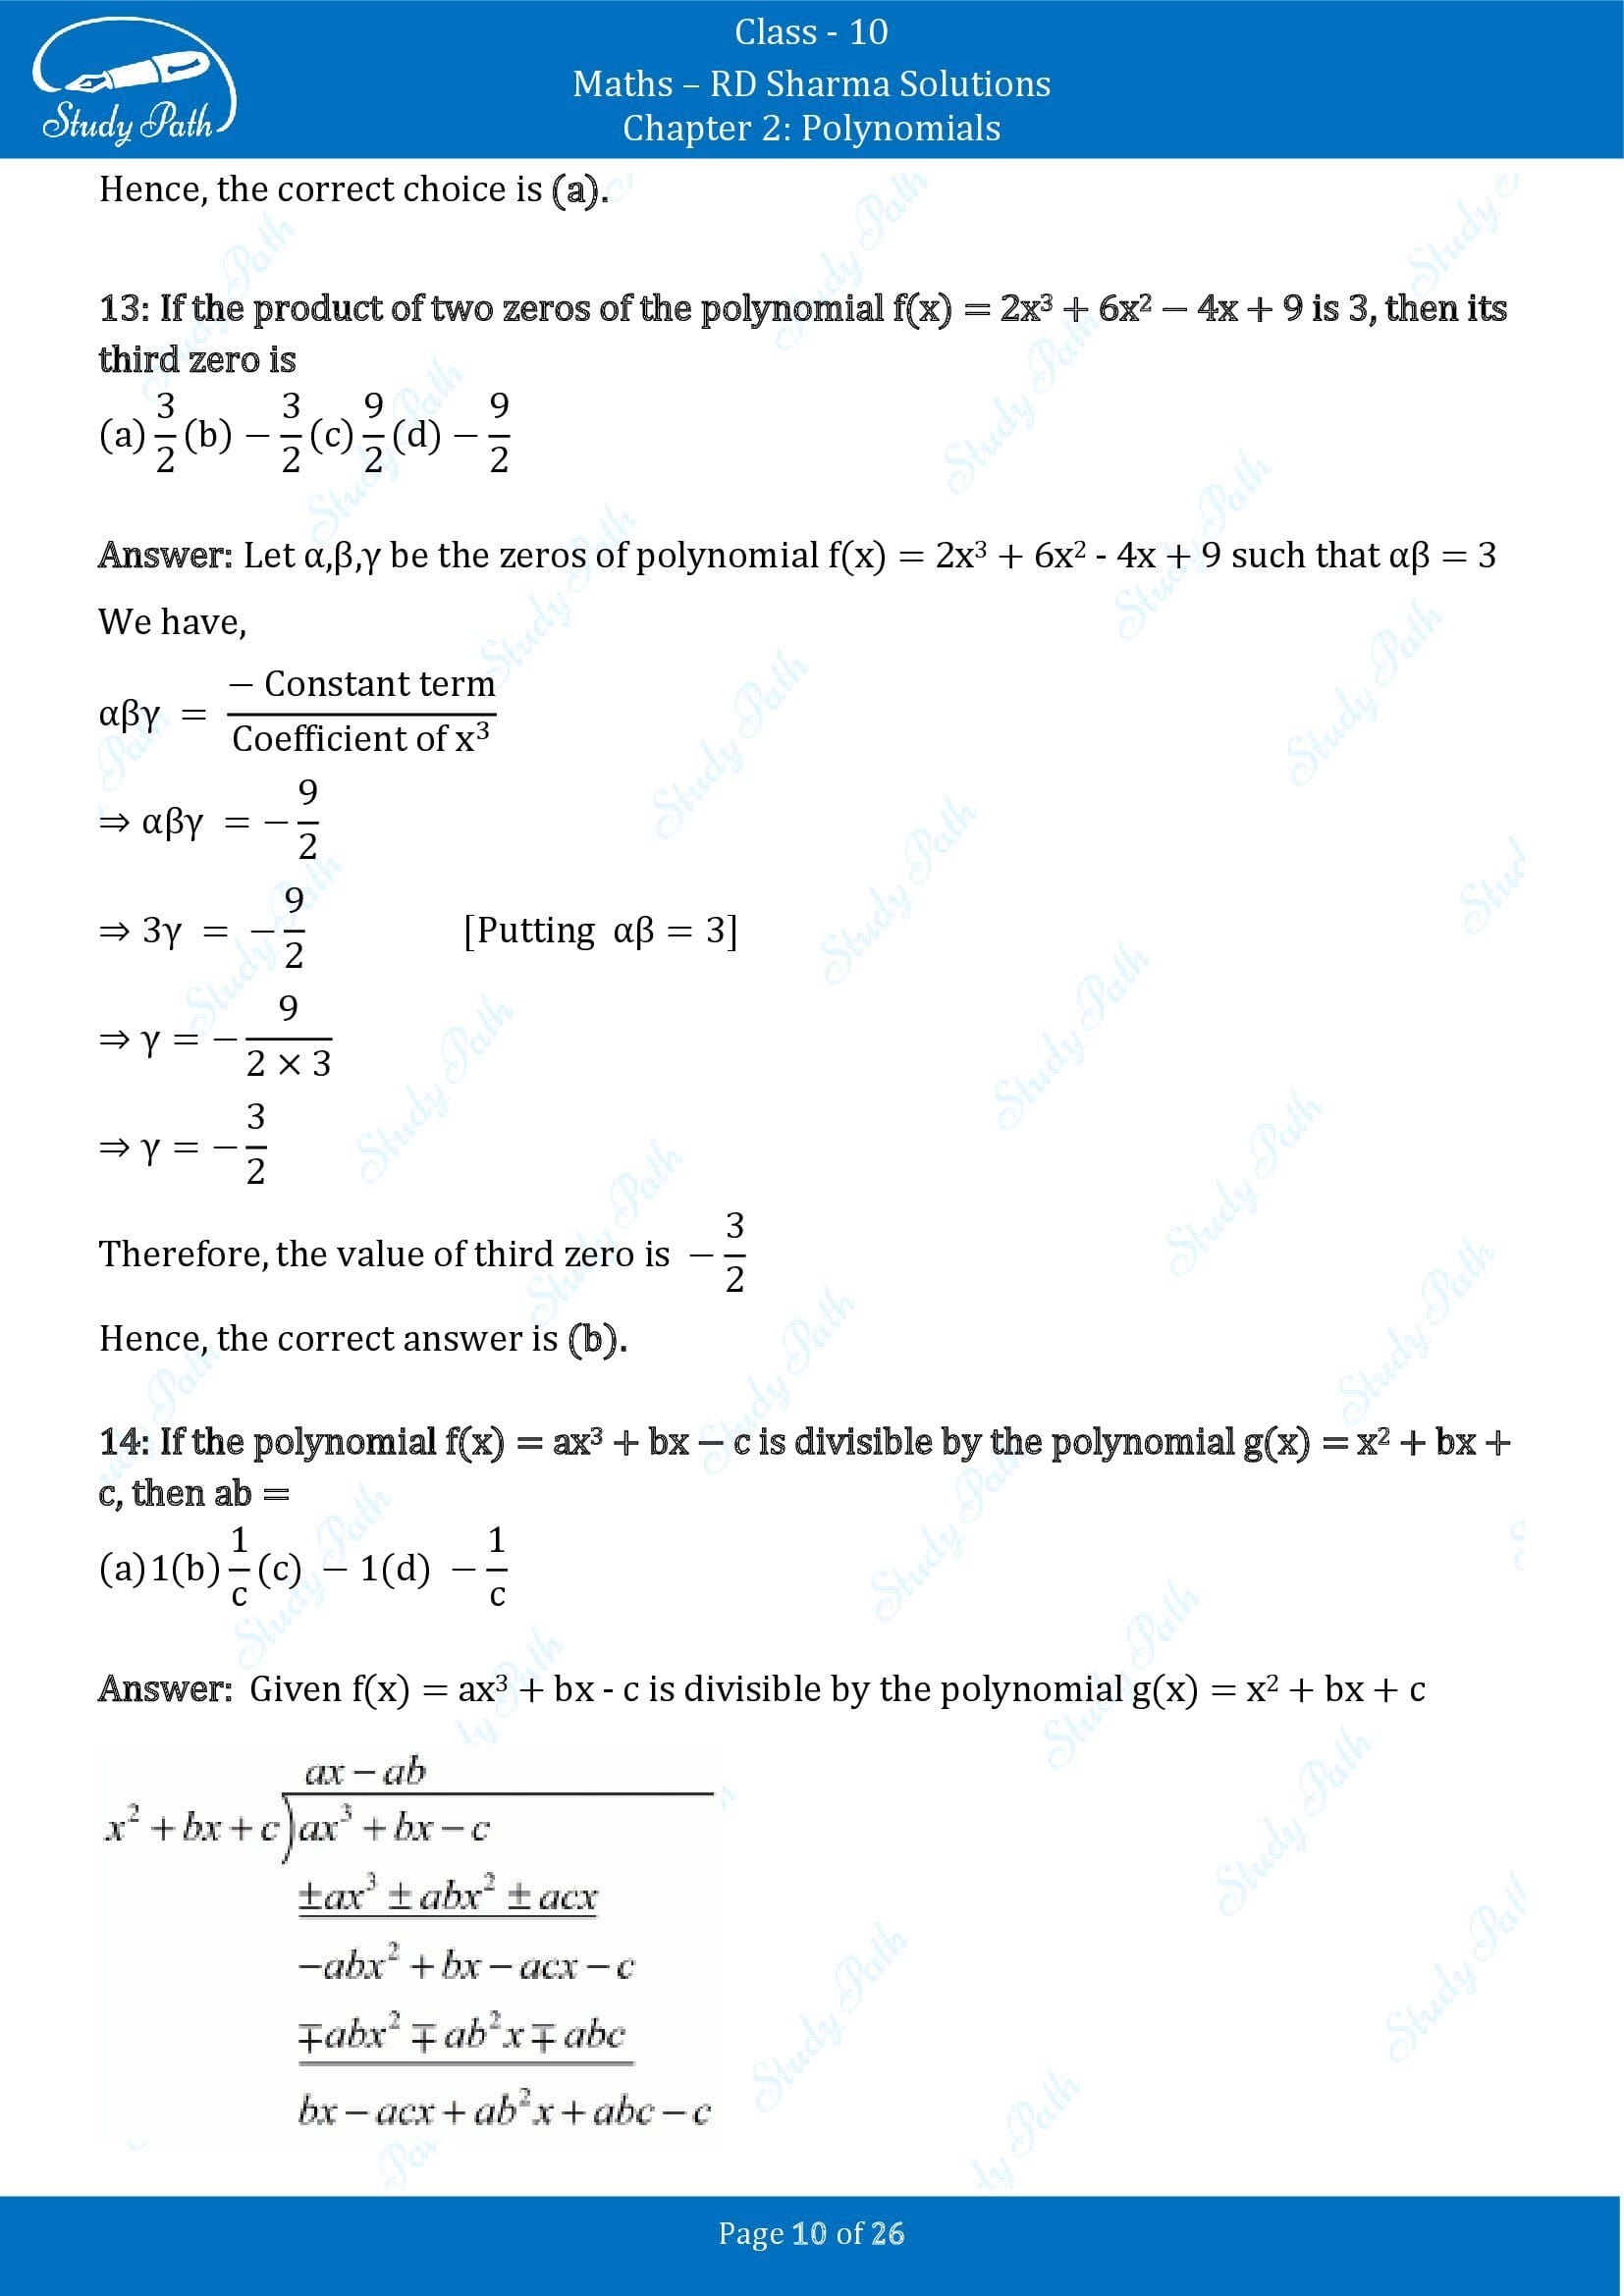 RD Sharma Solutions Class 10 Chapter 2 Polynomials Multiple Choice Questions MCQs 00010